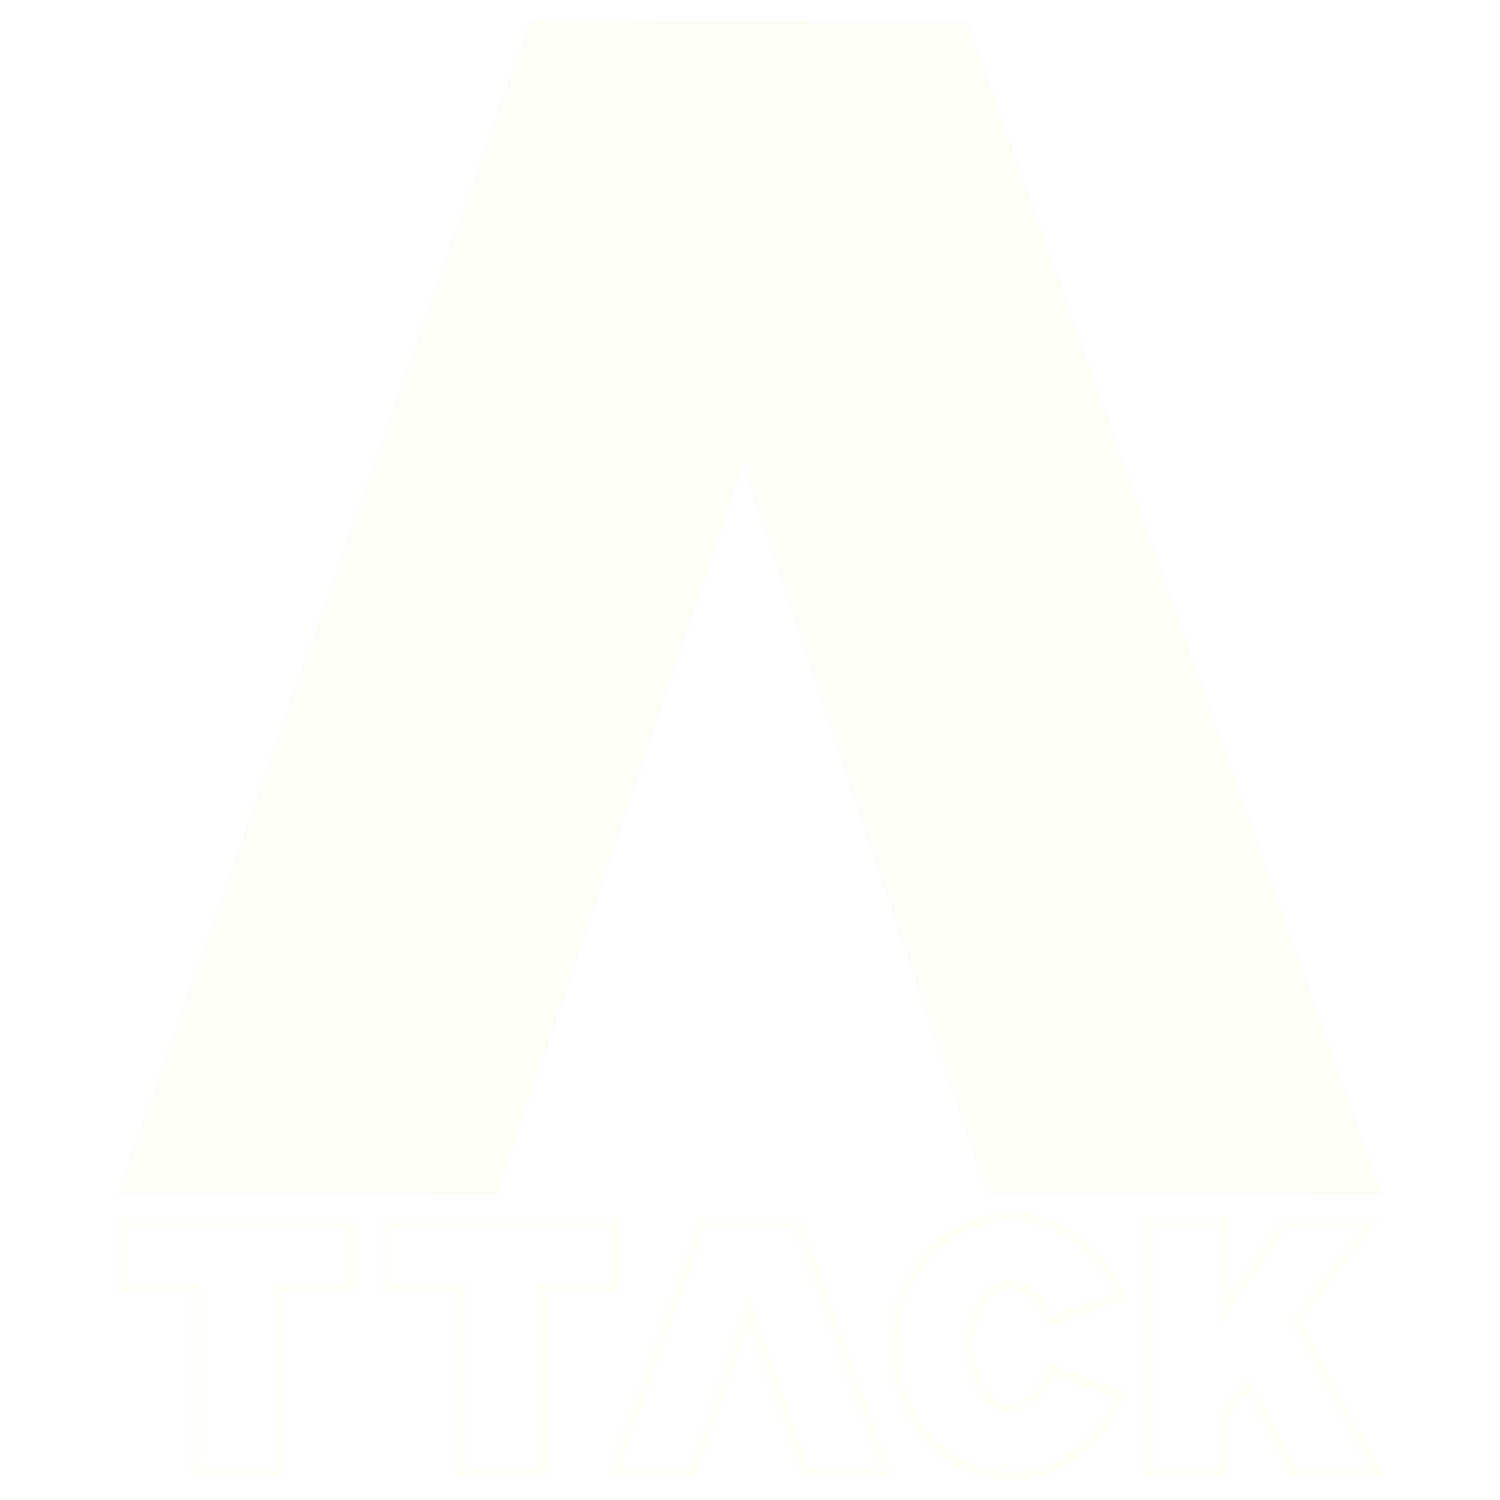 A-ttack Records